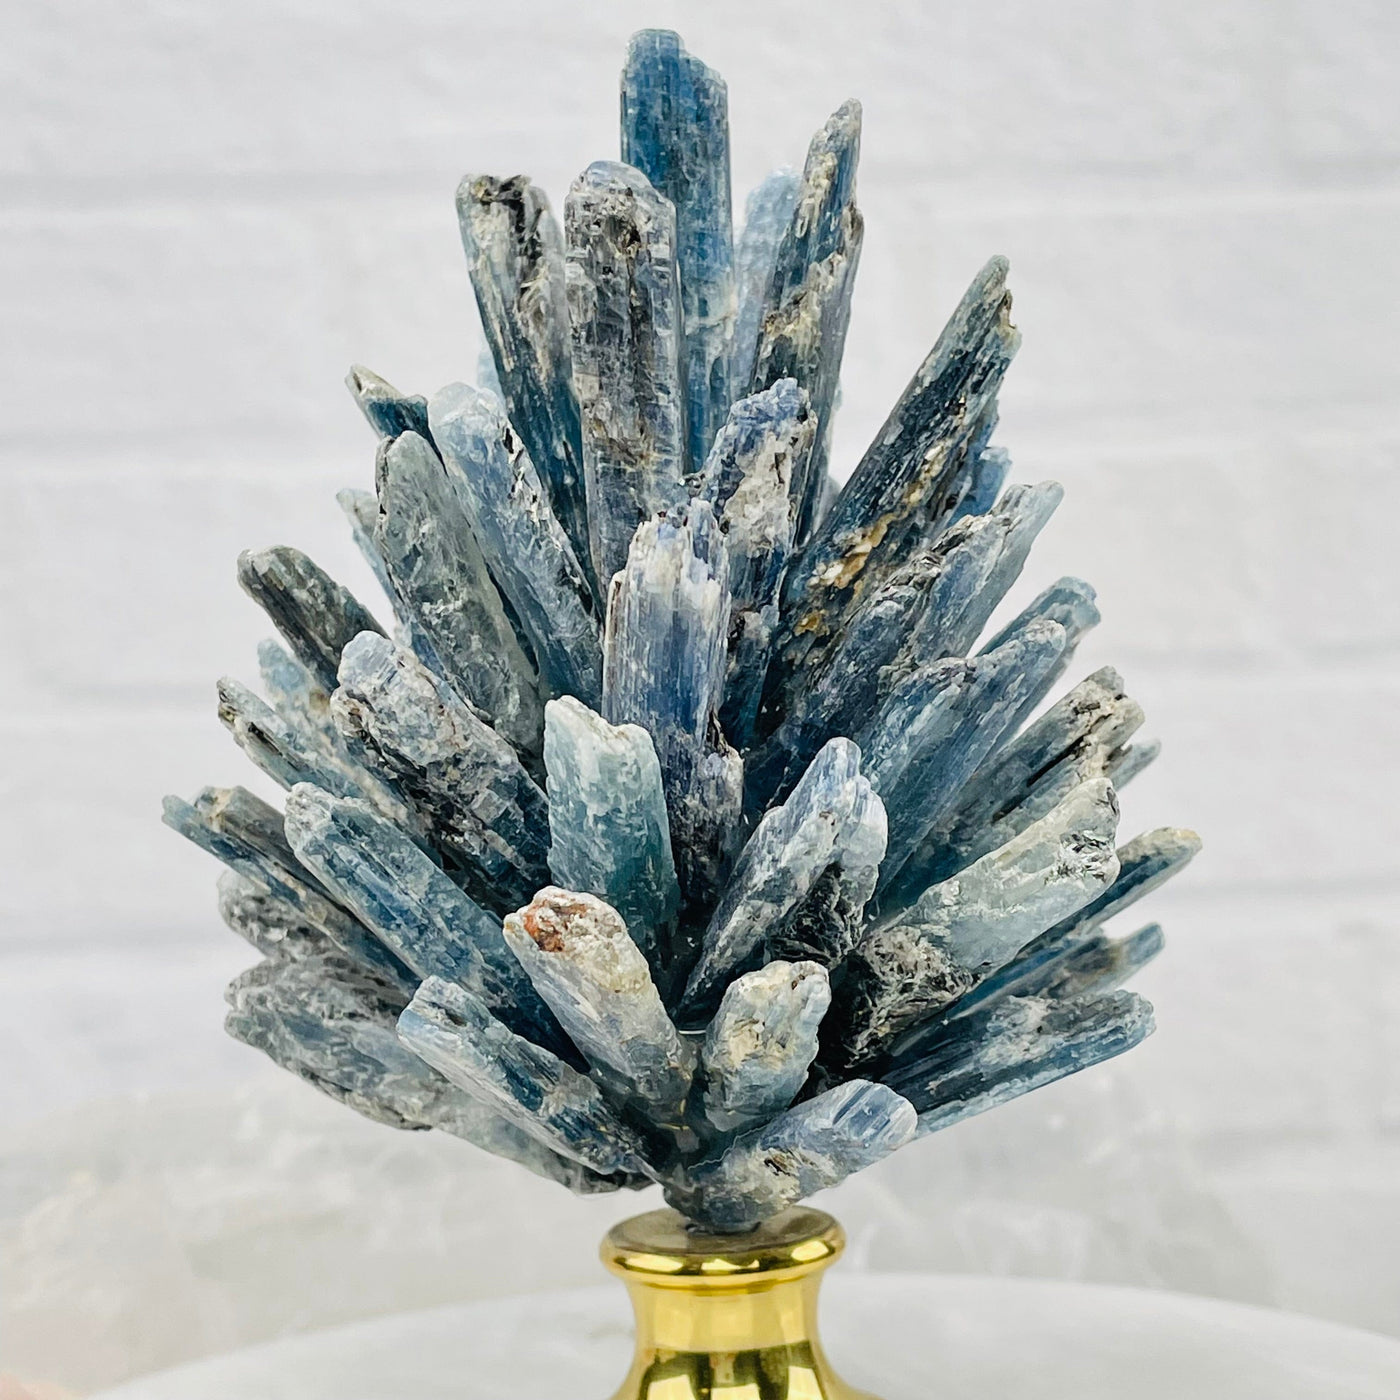 close up of the blue kyanite blades on top